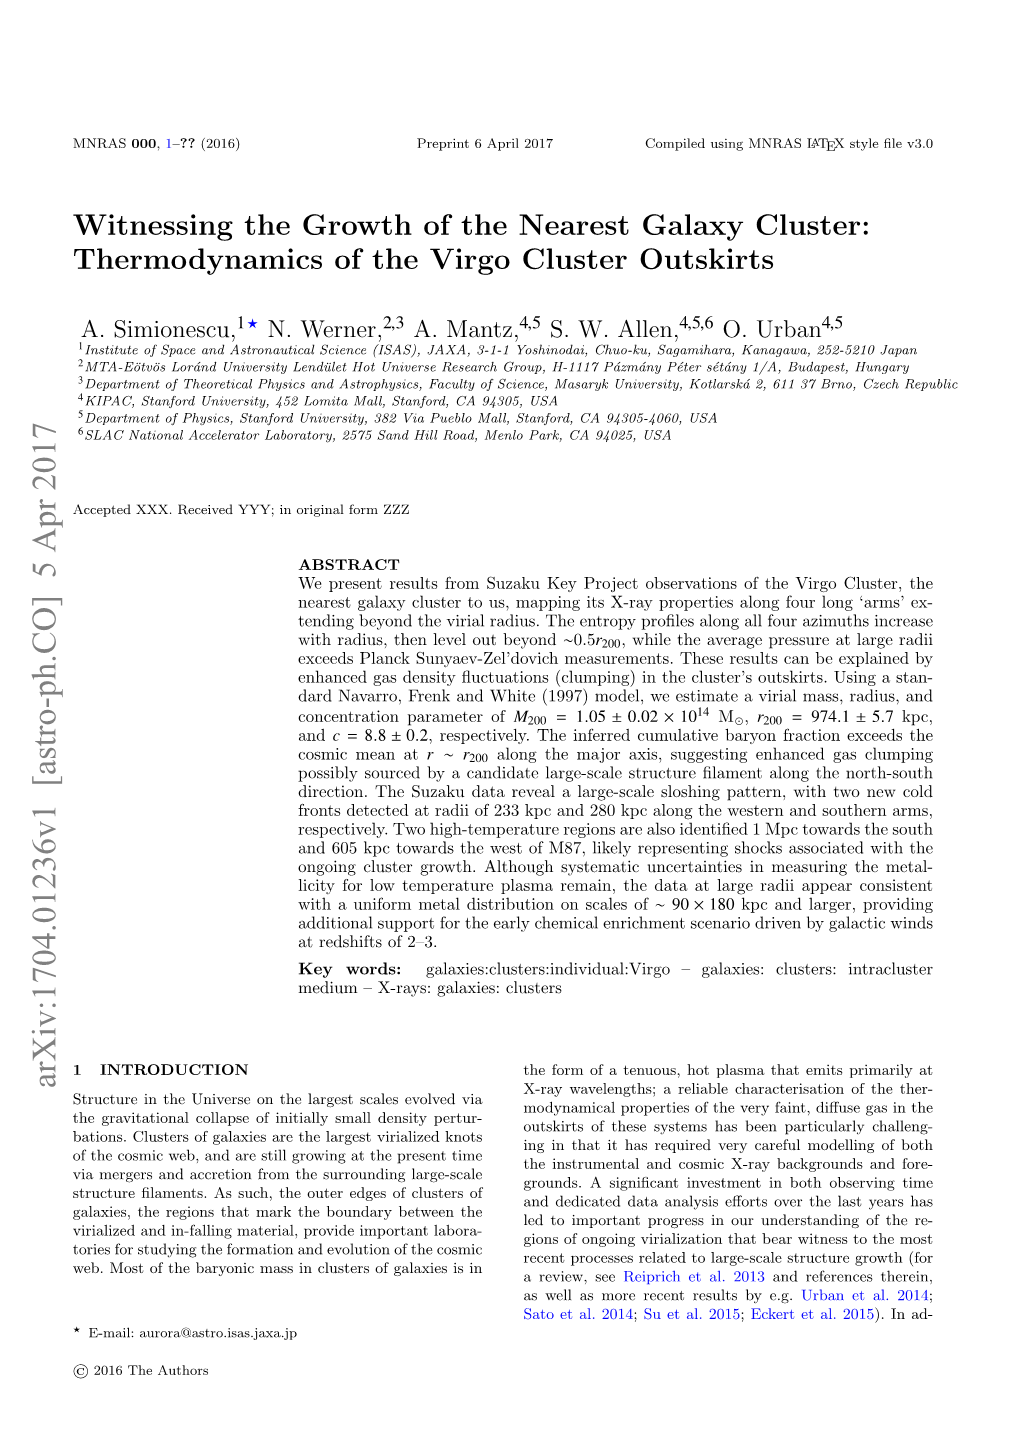 Thermodynamics of the Virgo Cluster Outskirts